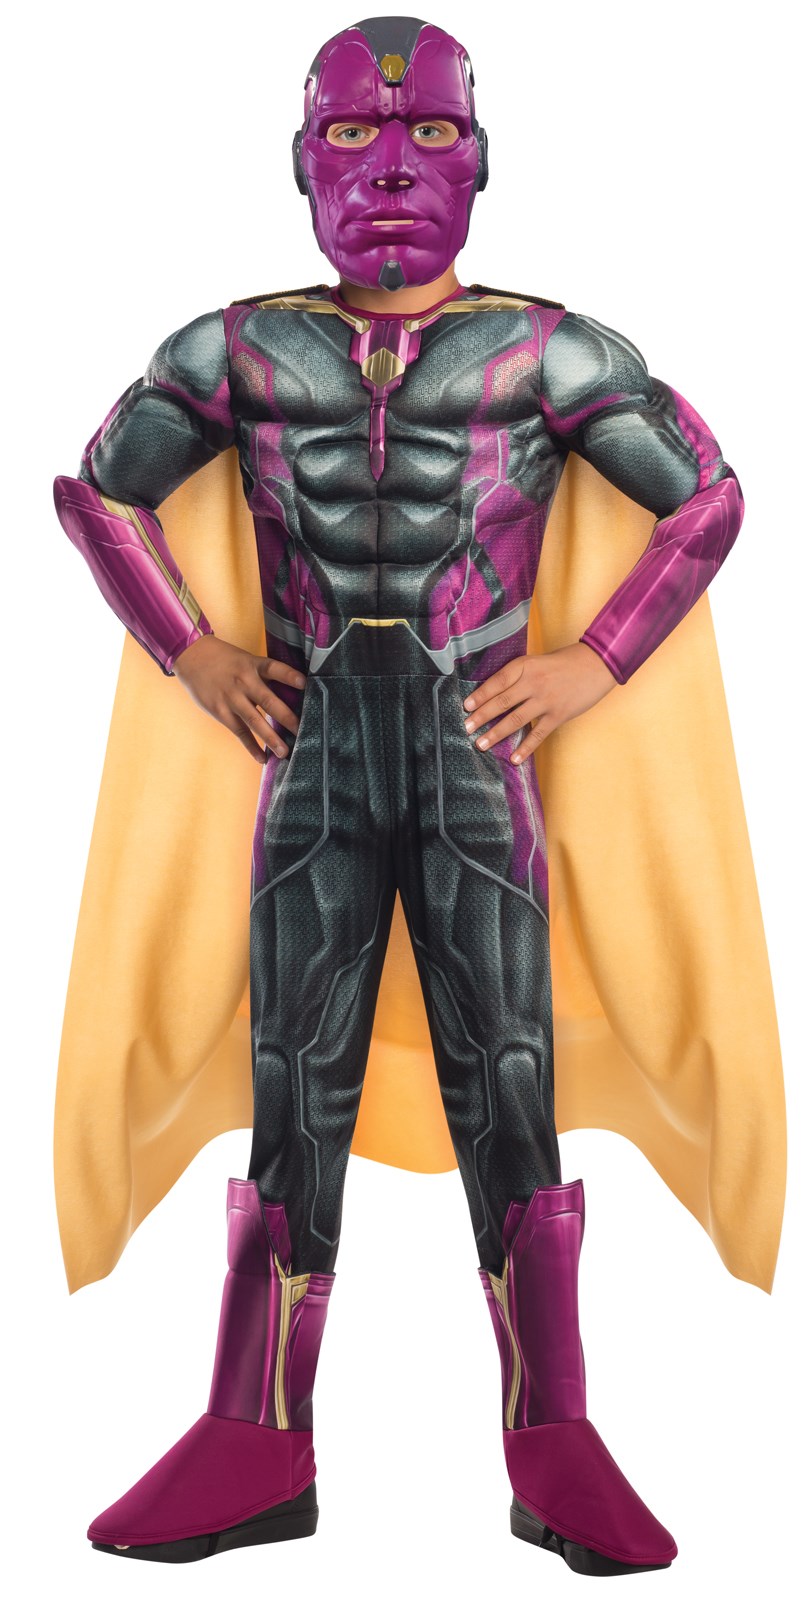 Avengers 2 – Age of Ultron: Deluxe Vision Costume For Kids